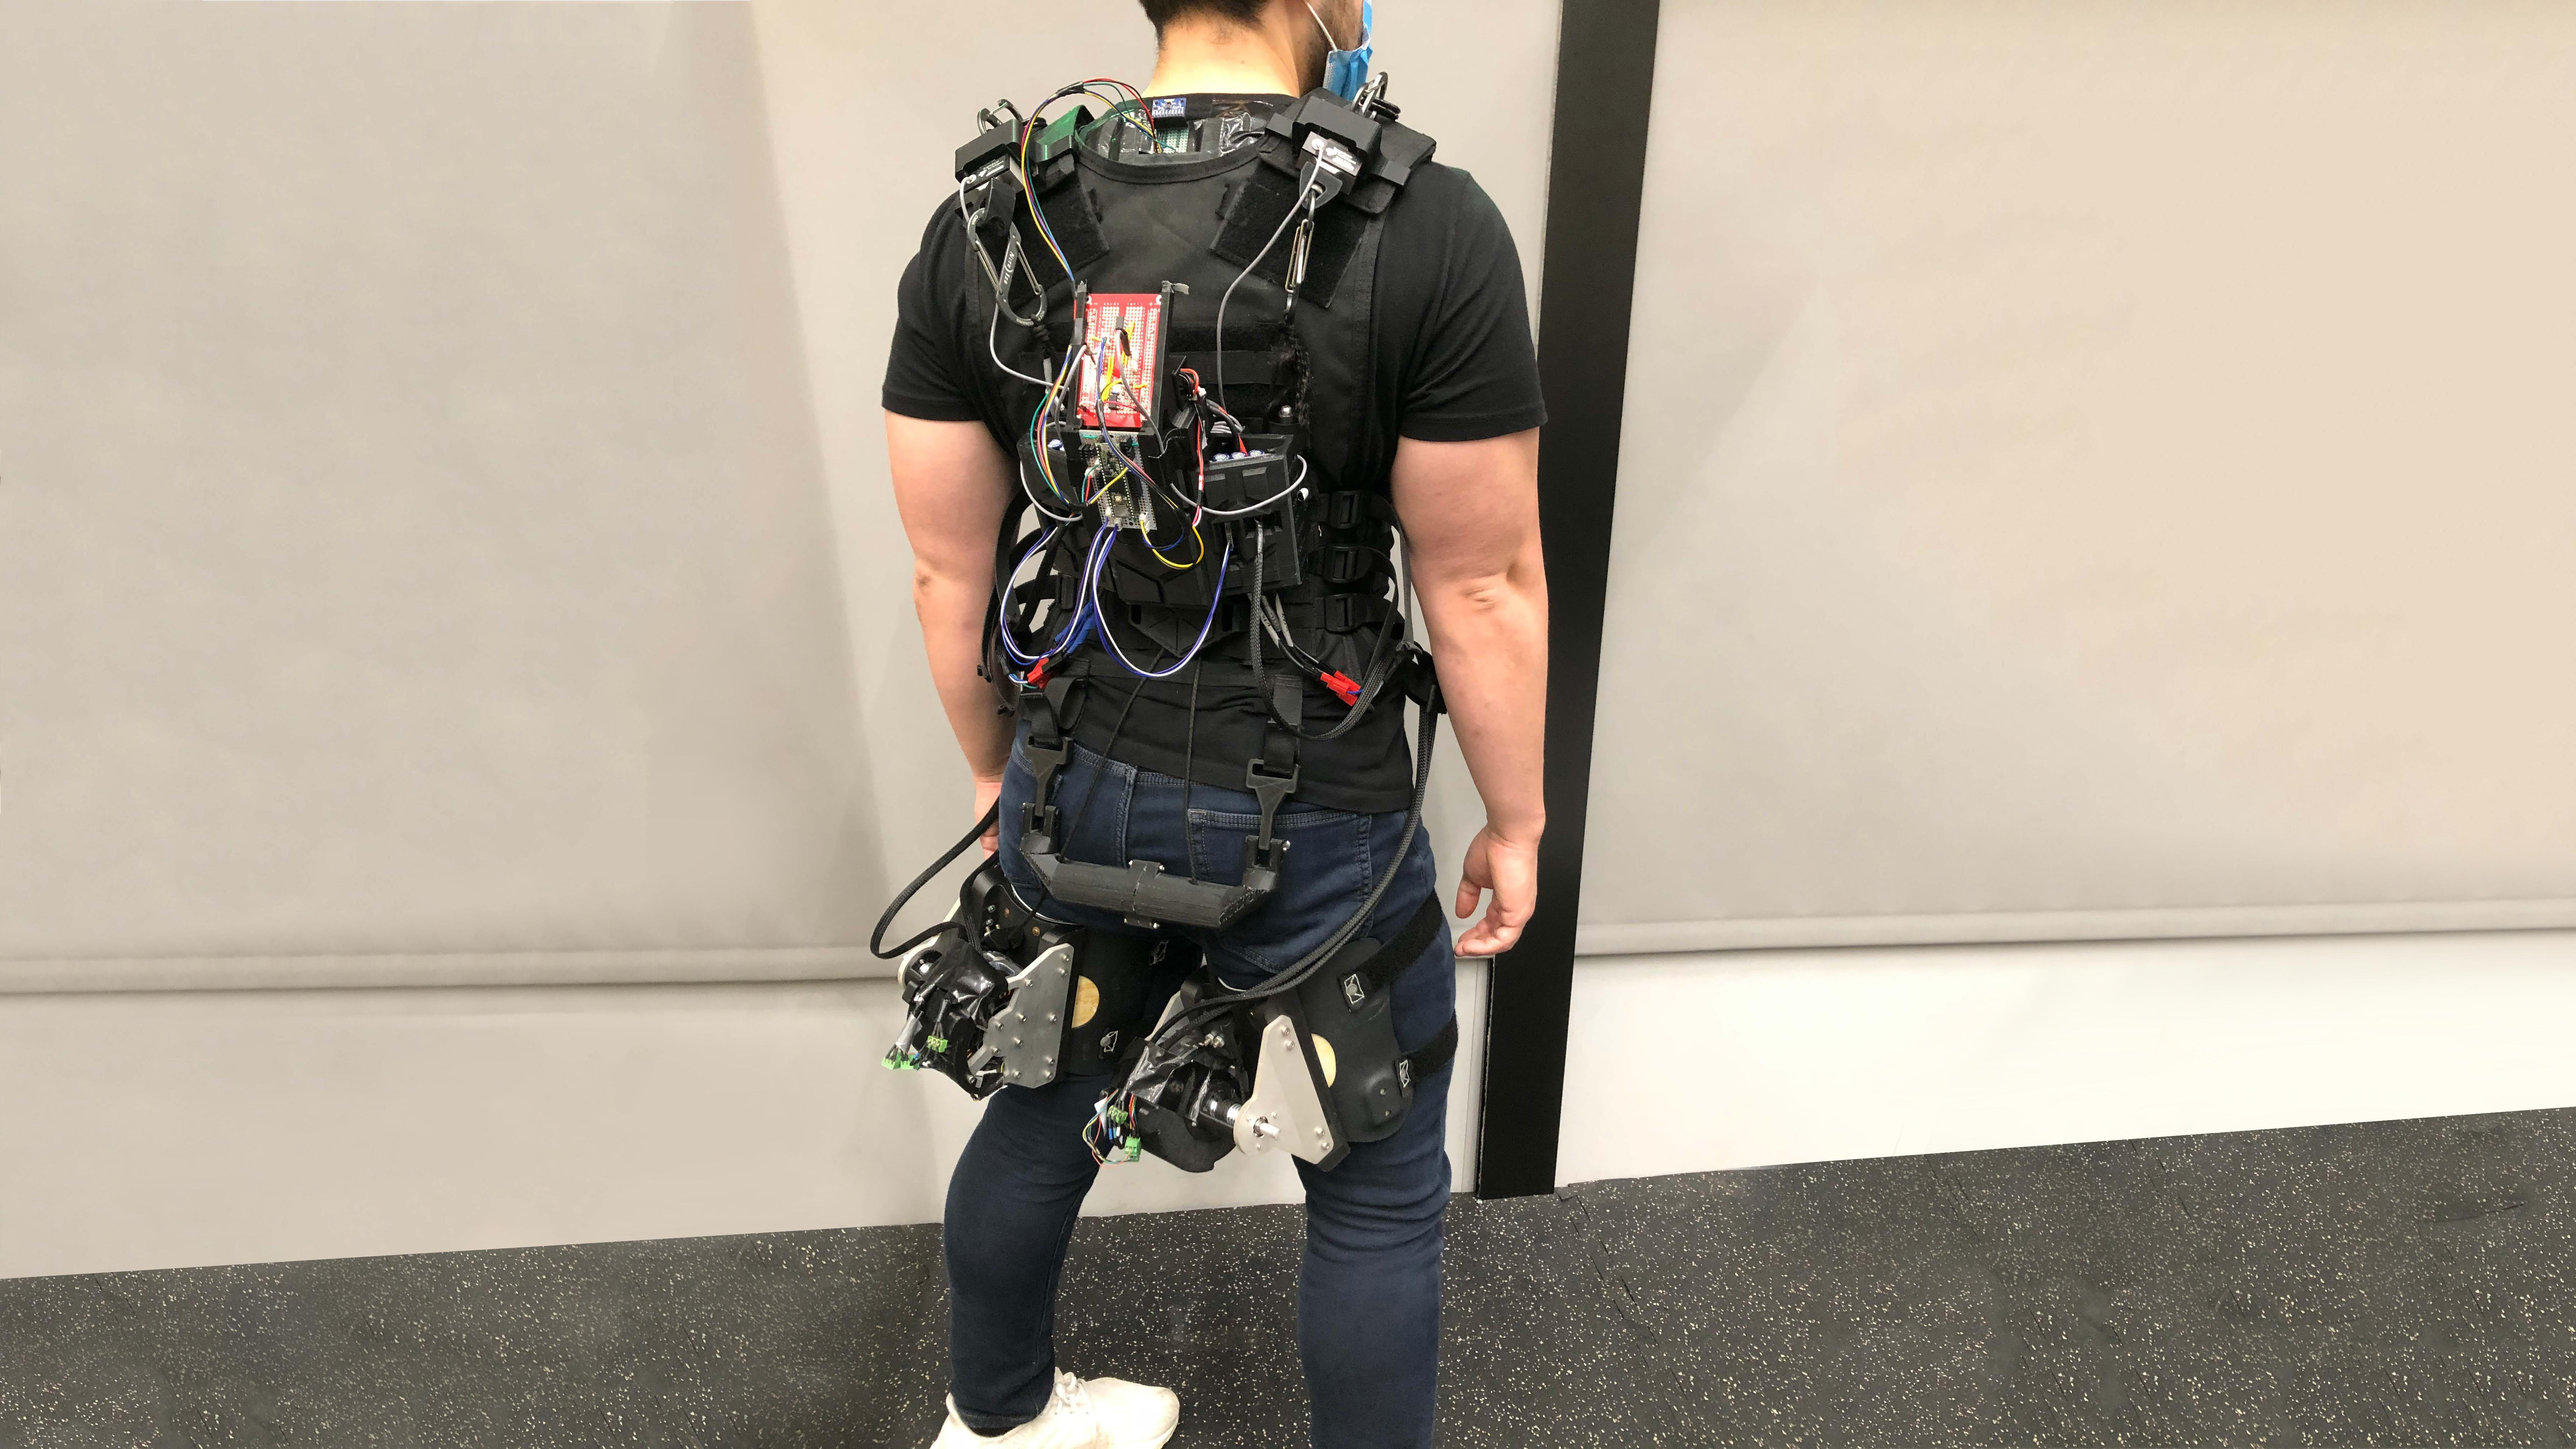 Newswise: How to Make an Exosuit that Helps with Awkward Lifts